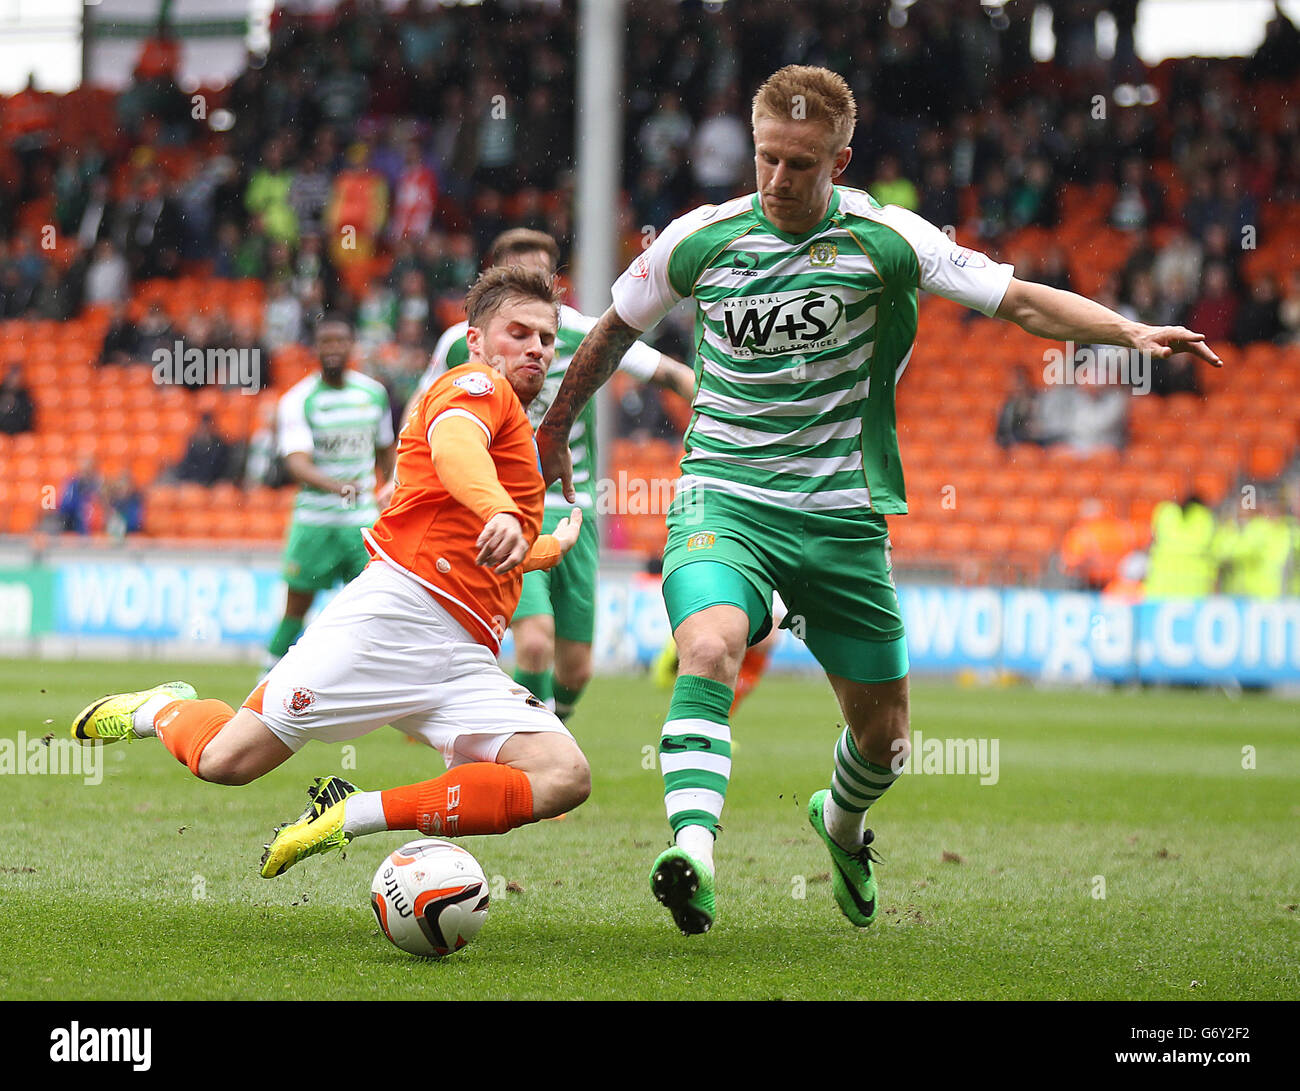 Soccer - Sky Bet Championship - Blackpool v Yeovil Town - Bloomfield Road. Blackpool's David Goodwillie and Yeovil Town's Byron Webster battle for the ball. Stock Photo